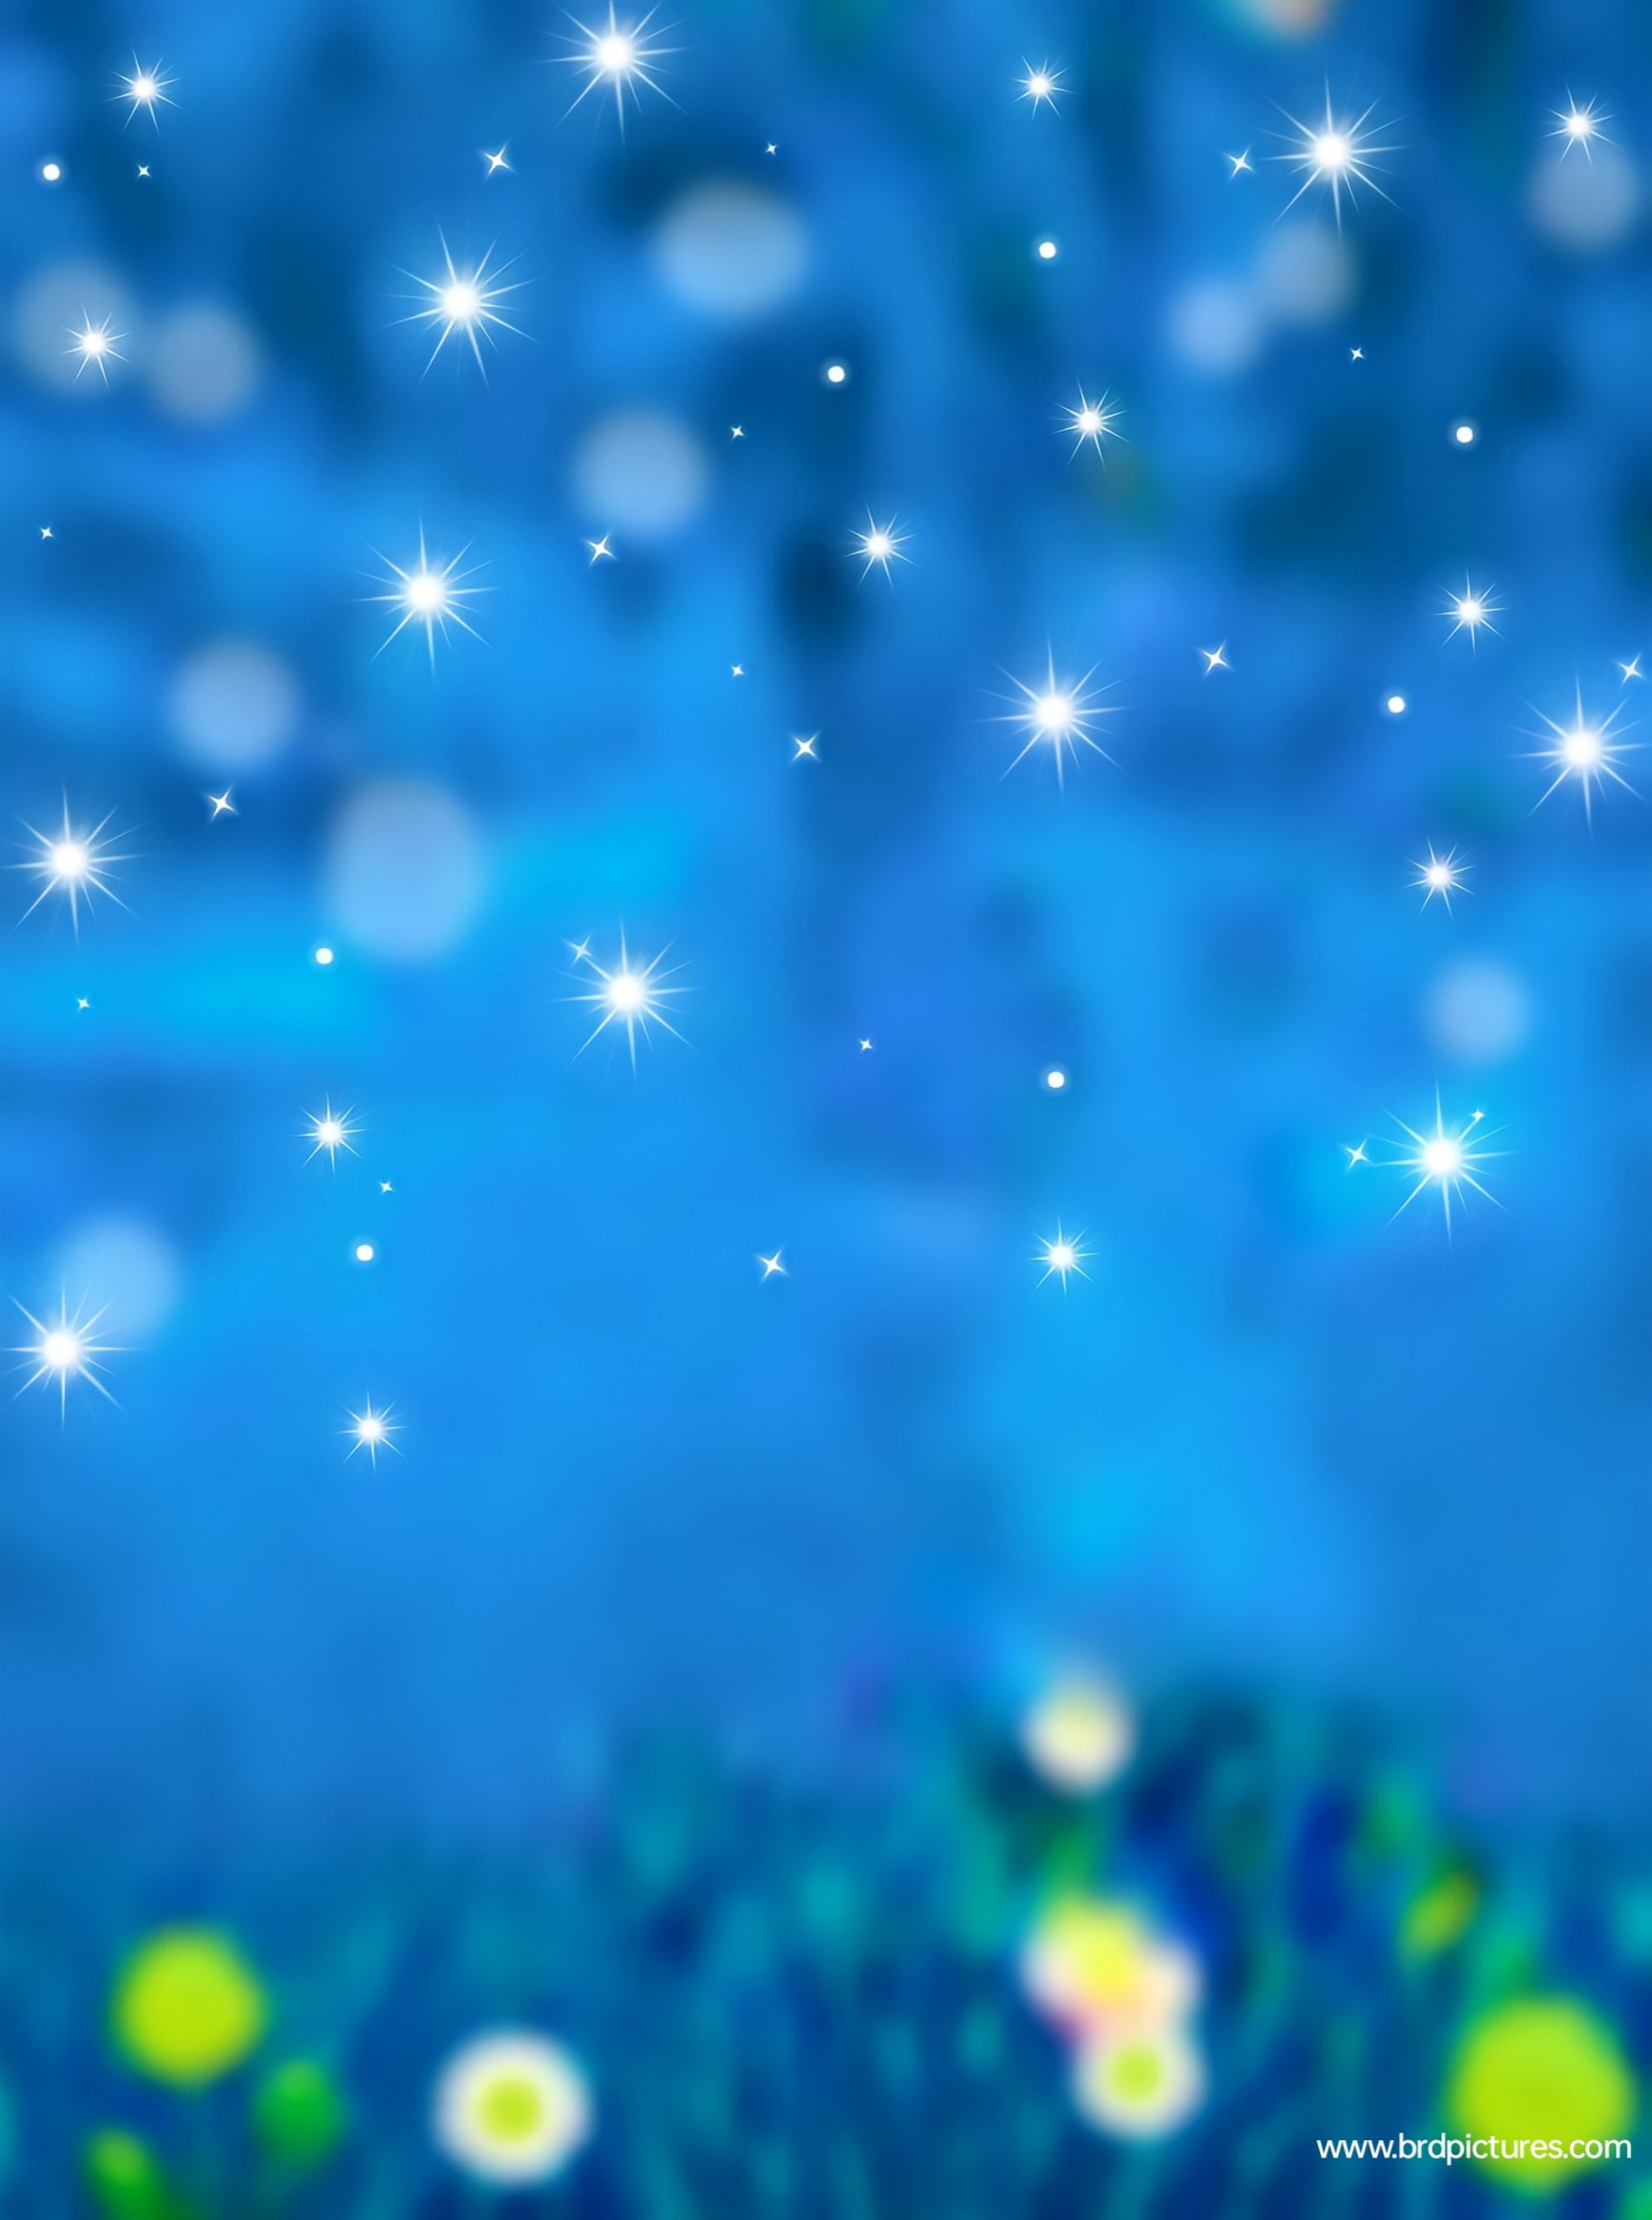 Blue Star Effect CB Background HD For Snapseed Editing 